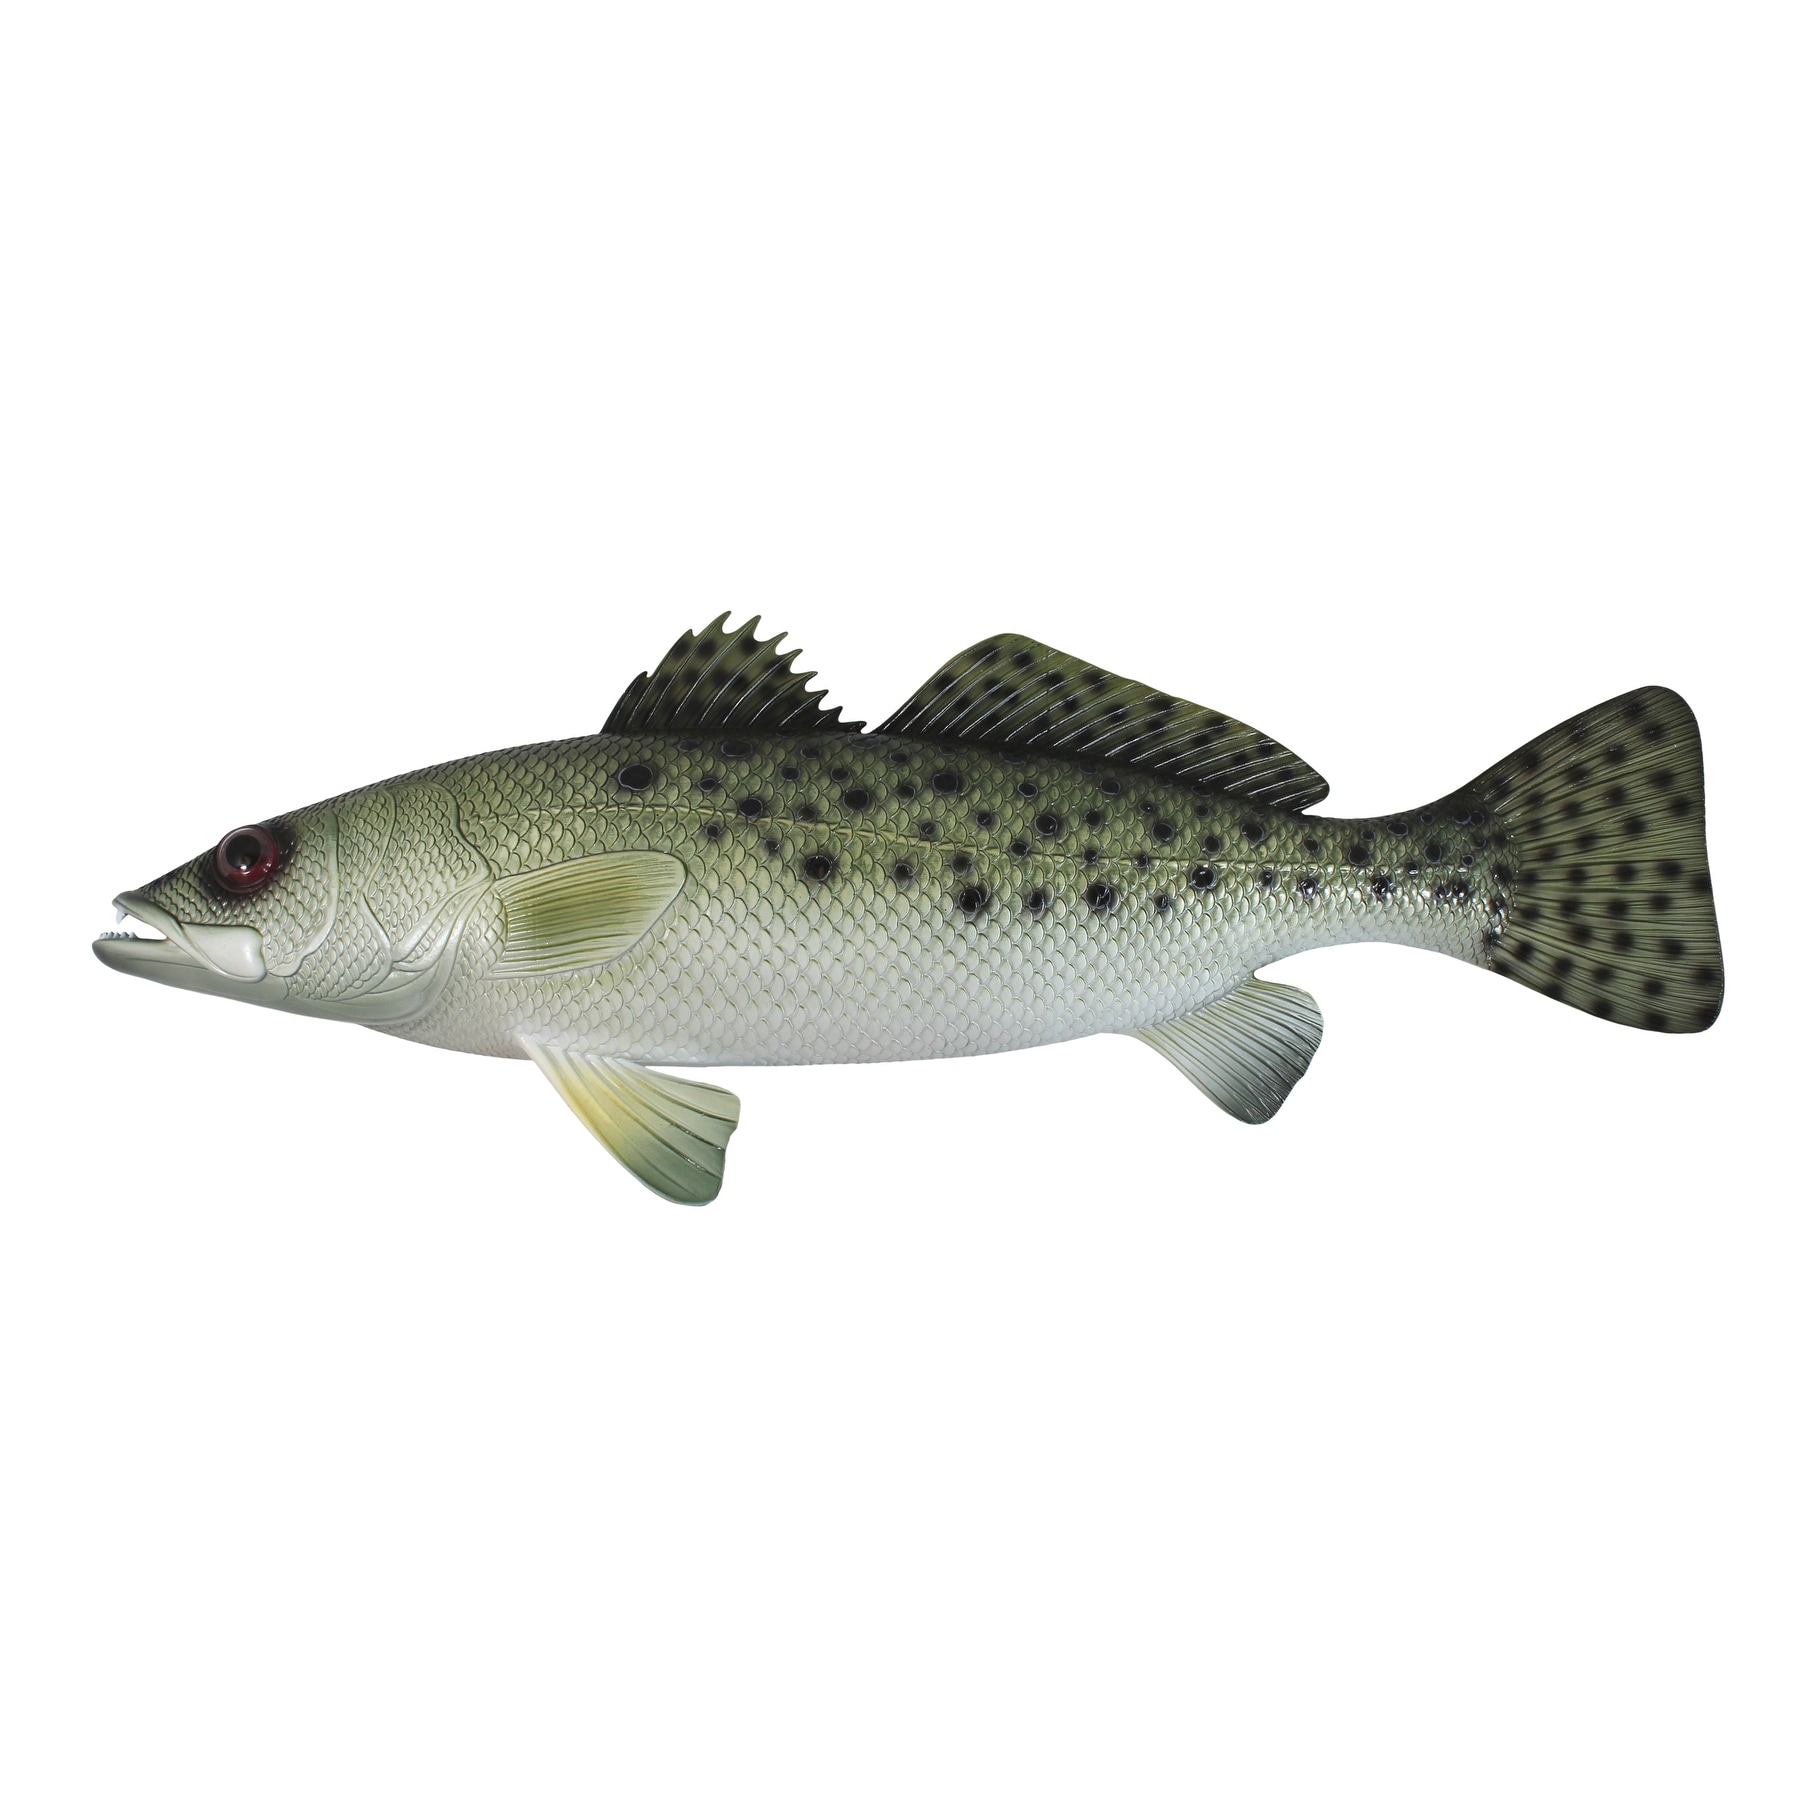 https://ak1.ostkcdn.com/images/products/is/images/direct/7cf218a7b30dfa4796a854ddc30224a7c5ca3409/Spotted-Sea-Trout-Replica-Nautical-Saltwater-Fishing-Wall-Decor-28-Inches.jpg